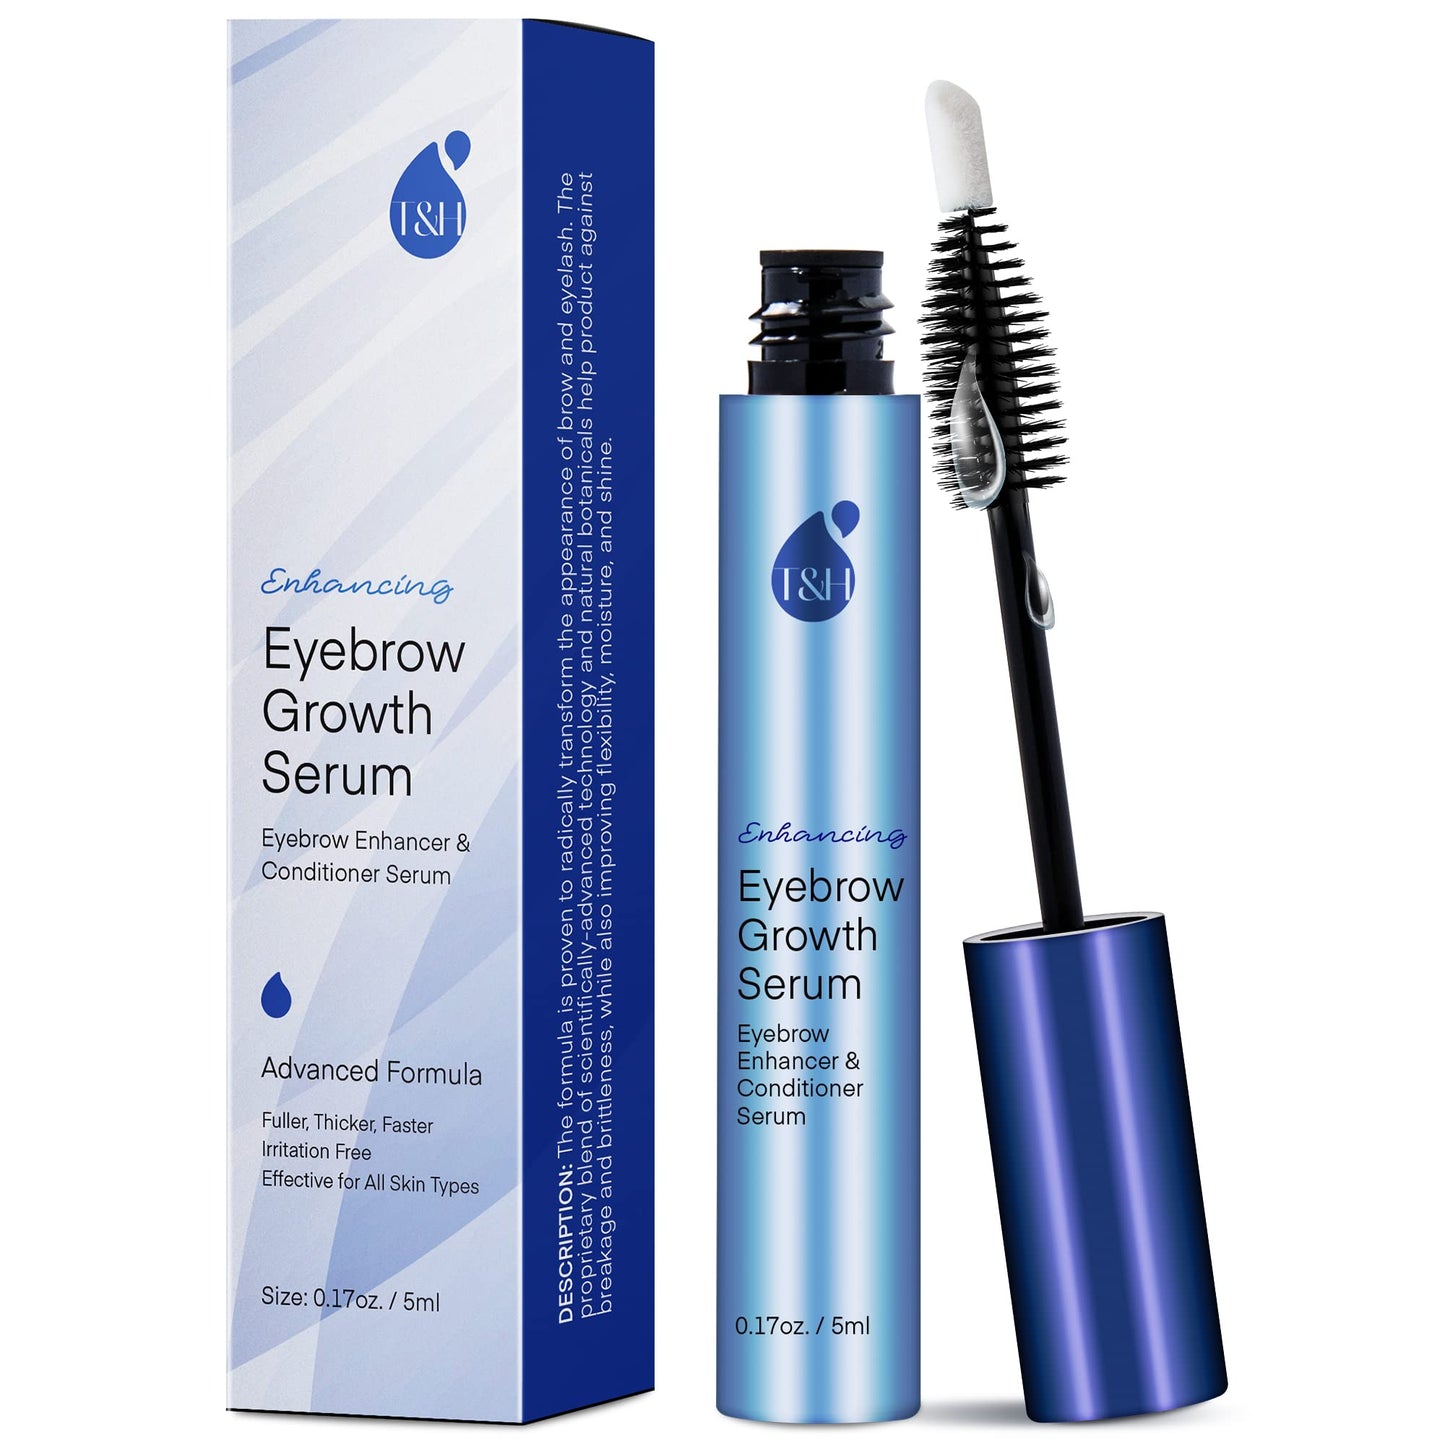 Eyebrow Growth Serum - Natural Eyebrow Serum and Enhancer for Thicker Brows and Grow Bows Faster, Longer, Fuller - 5mL